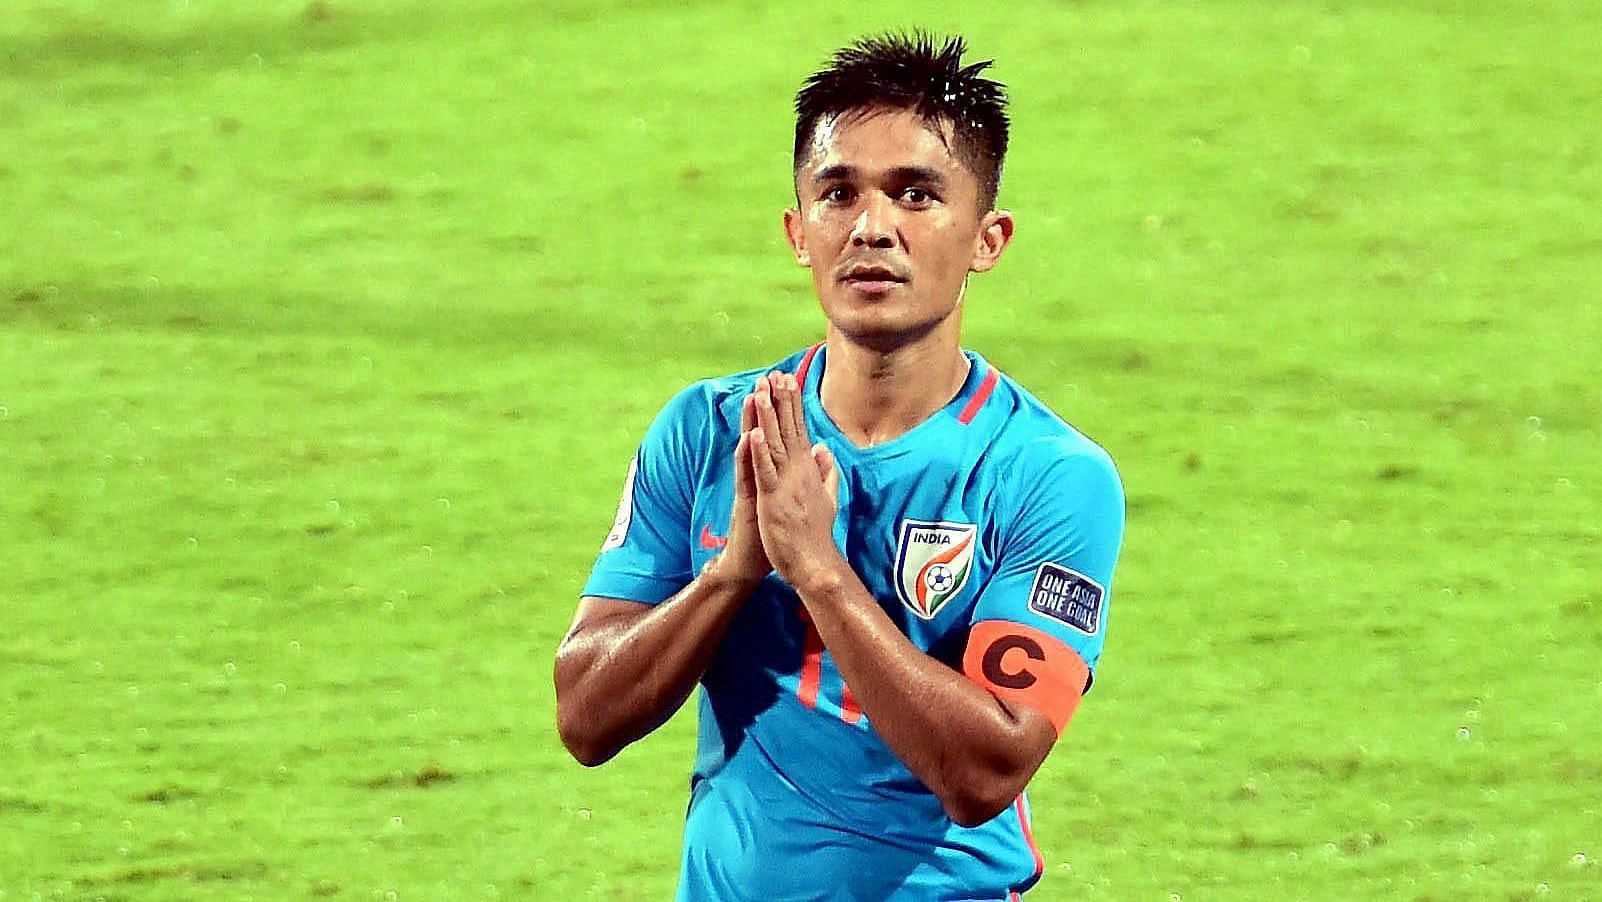 Sunil Chhetri reveals early in his career he cried many times and even contemplated quitting the sport.